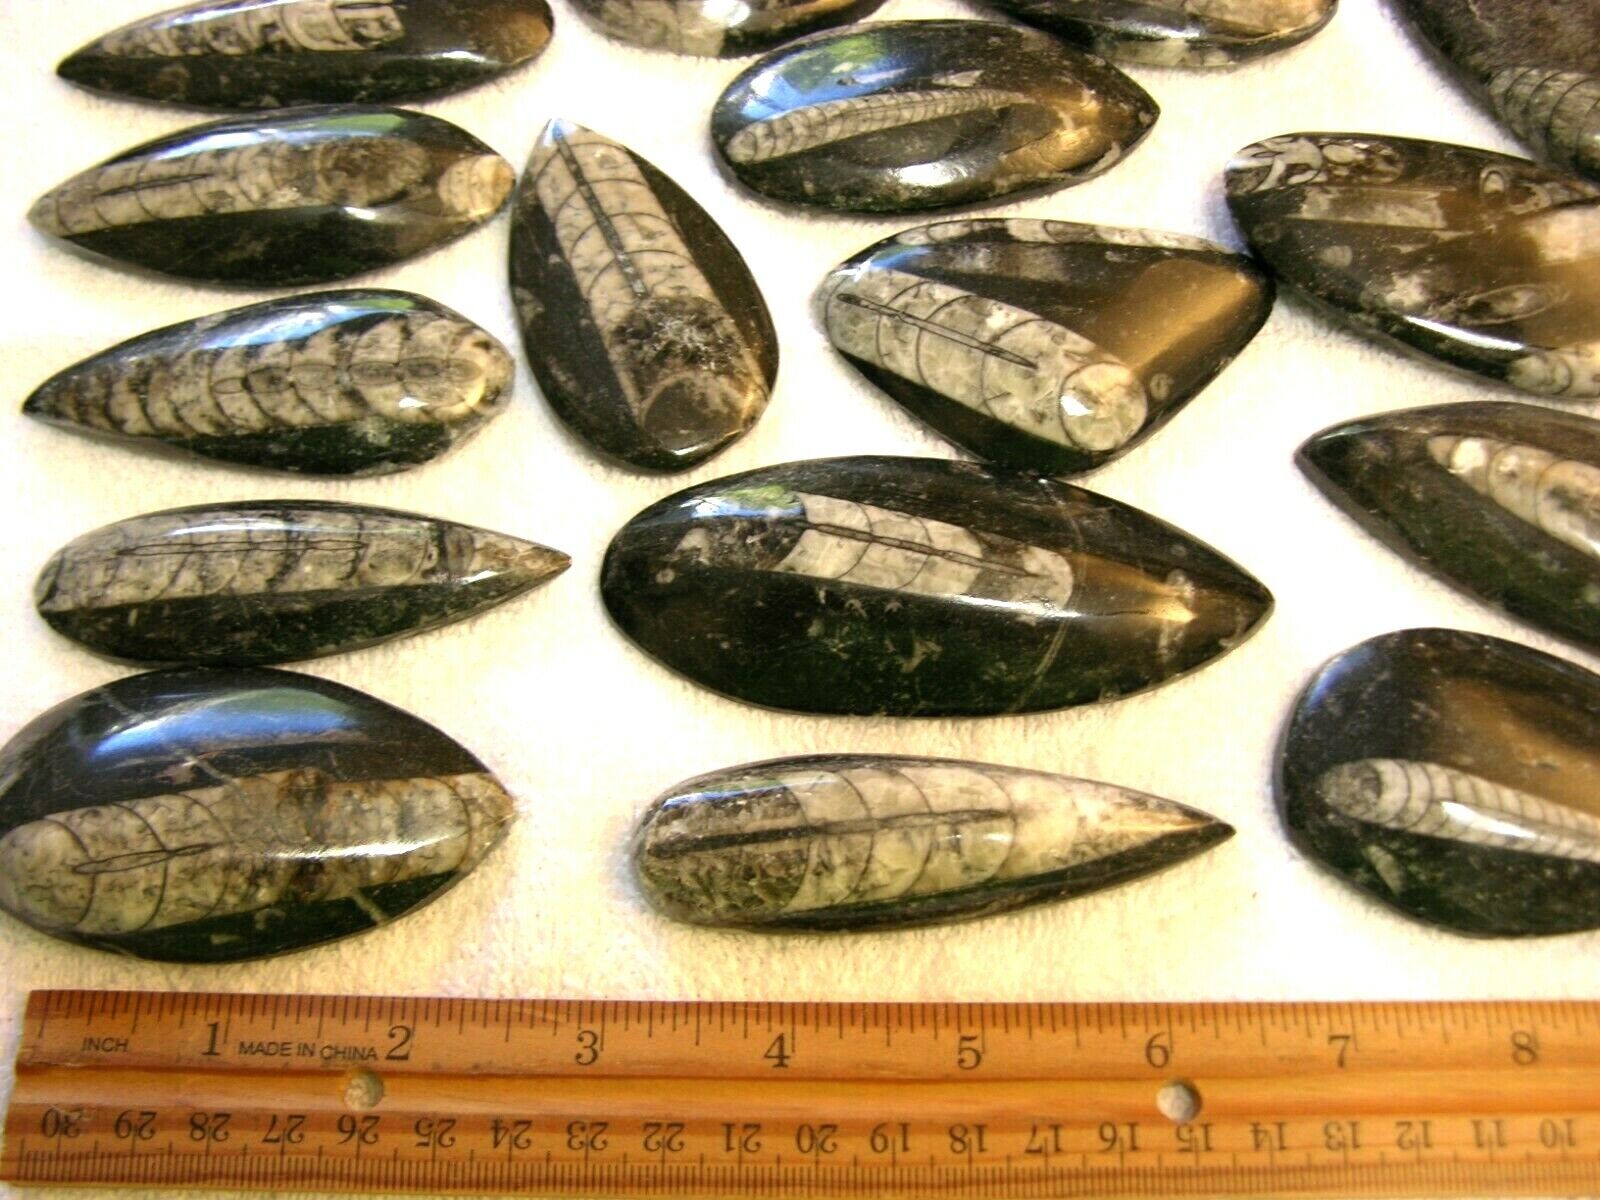 Orthoceras fossils polished bigger 2-4 inch 3 piece lots 400 million years old